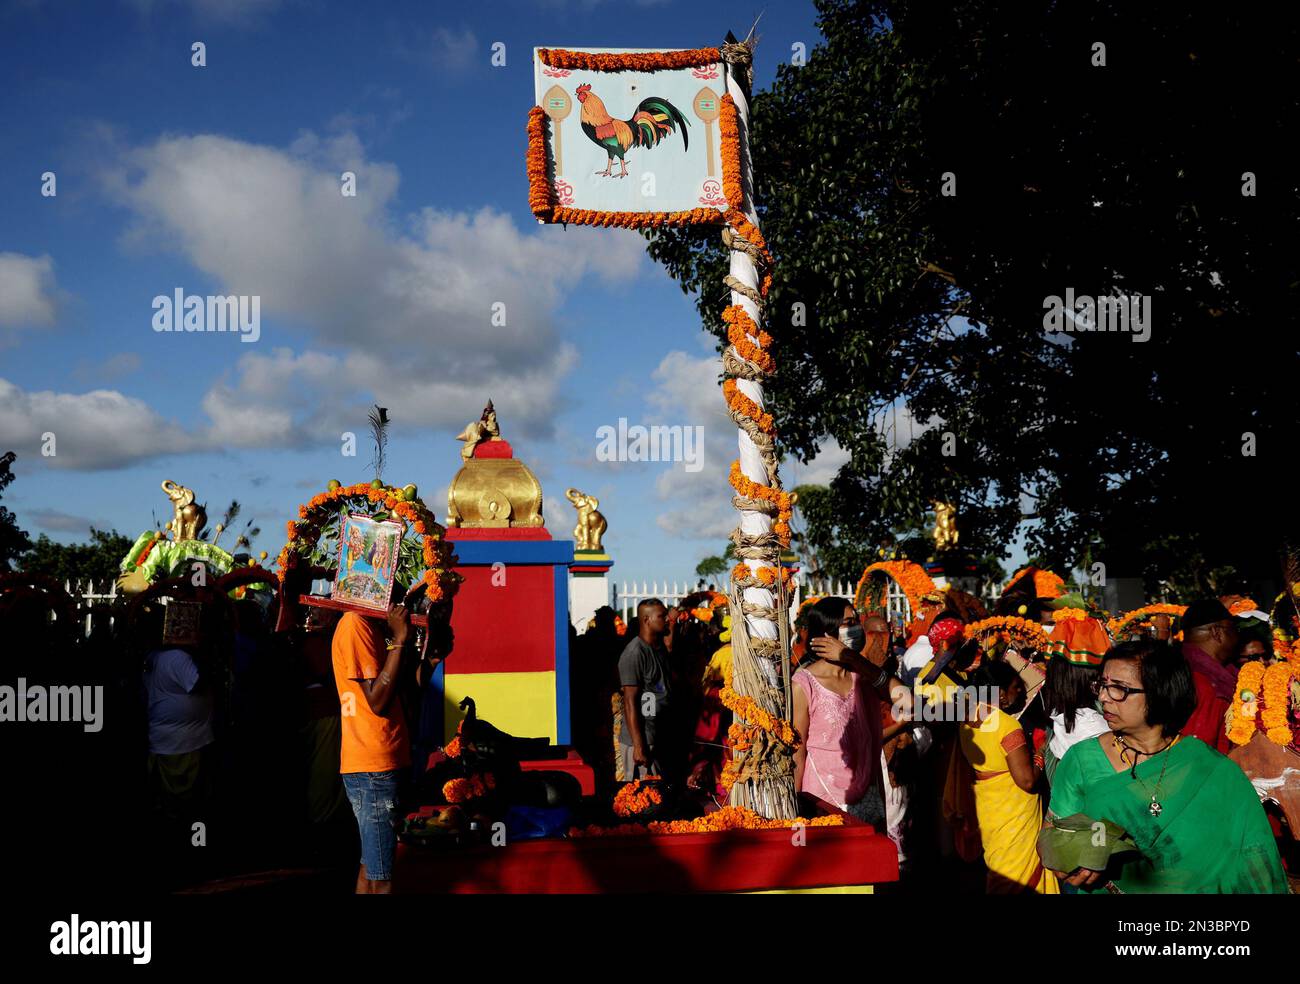 A flag bearing an image of a rooster flies up at Grammadave Alayam temple  during the annual Thaipoosam Kavady festival in Chatsworth, south of  Durban, South Africa on February 4, 2023. The